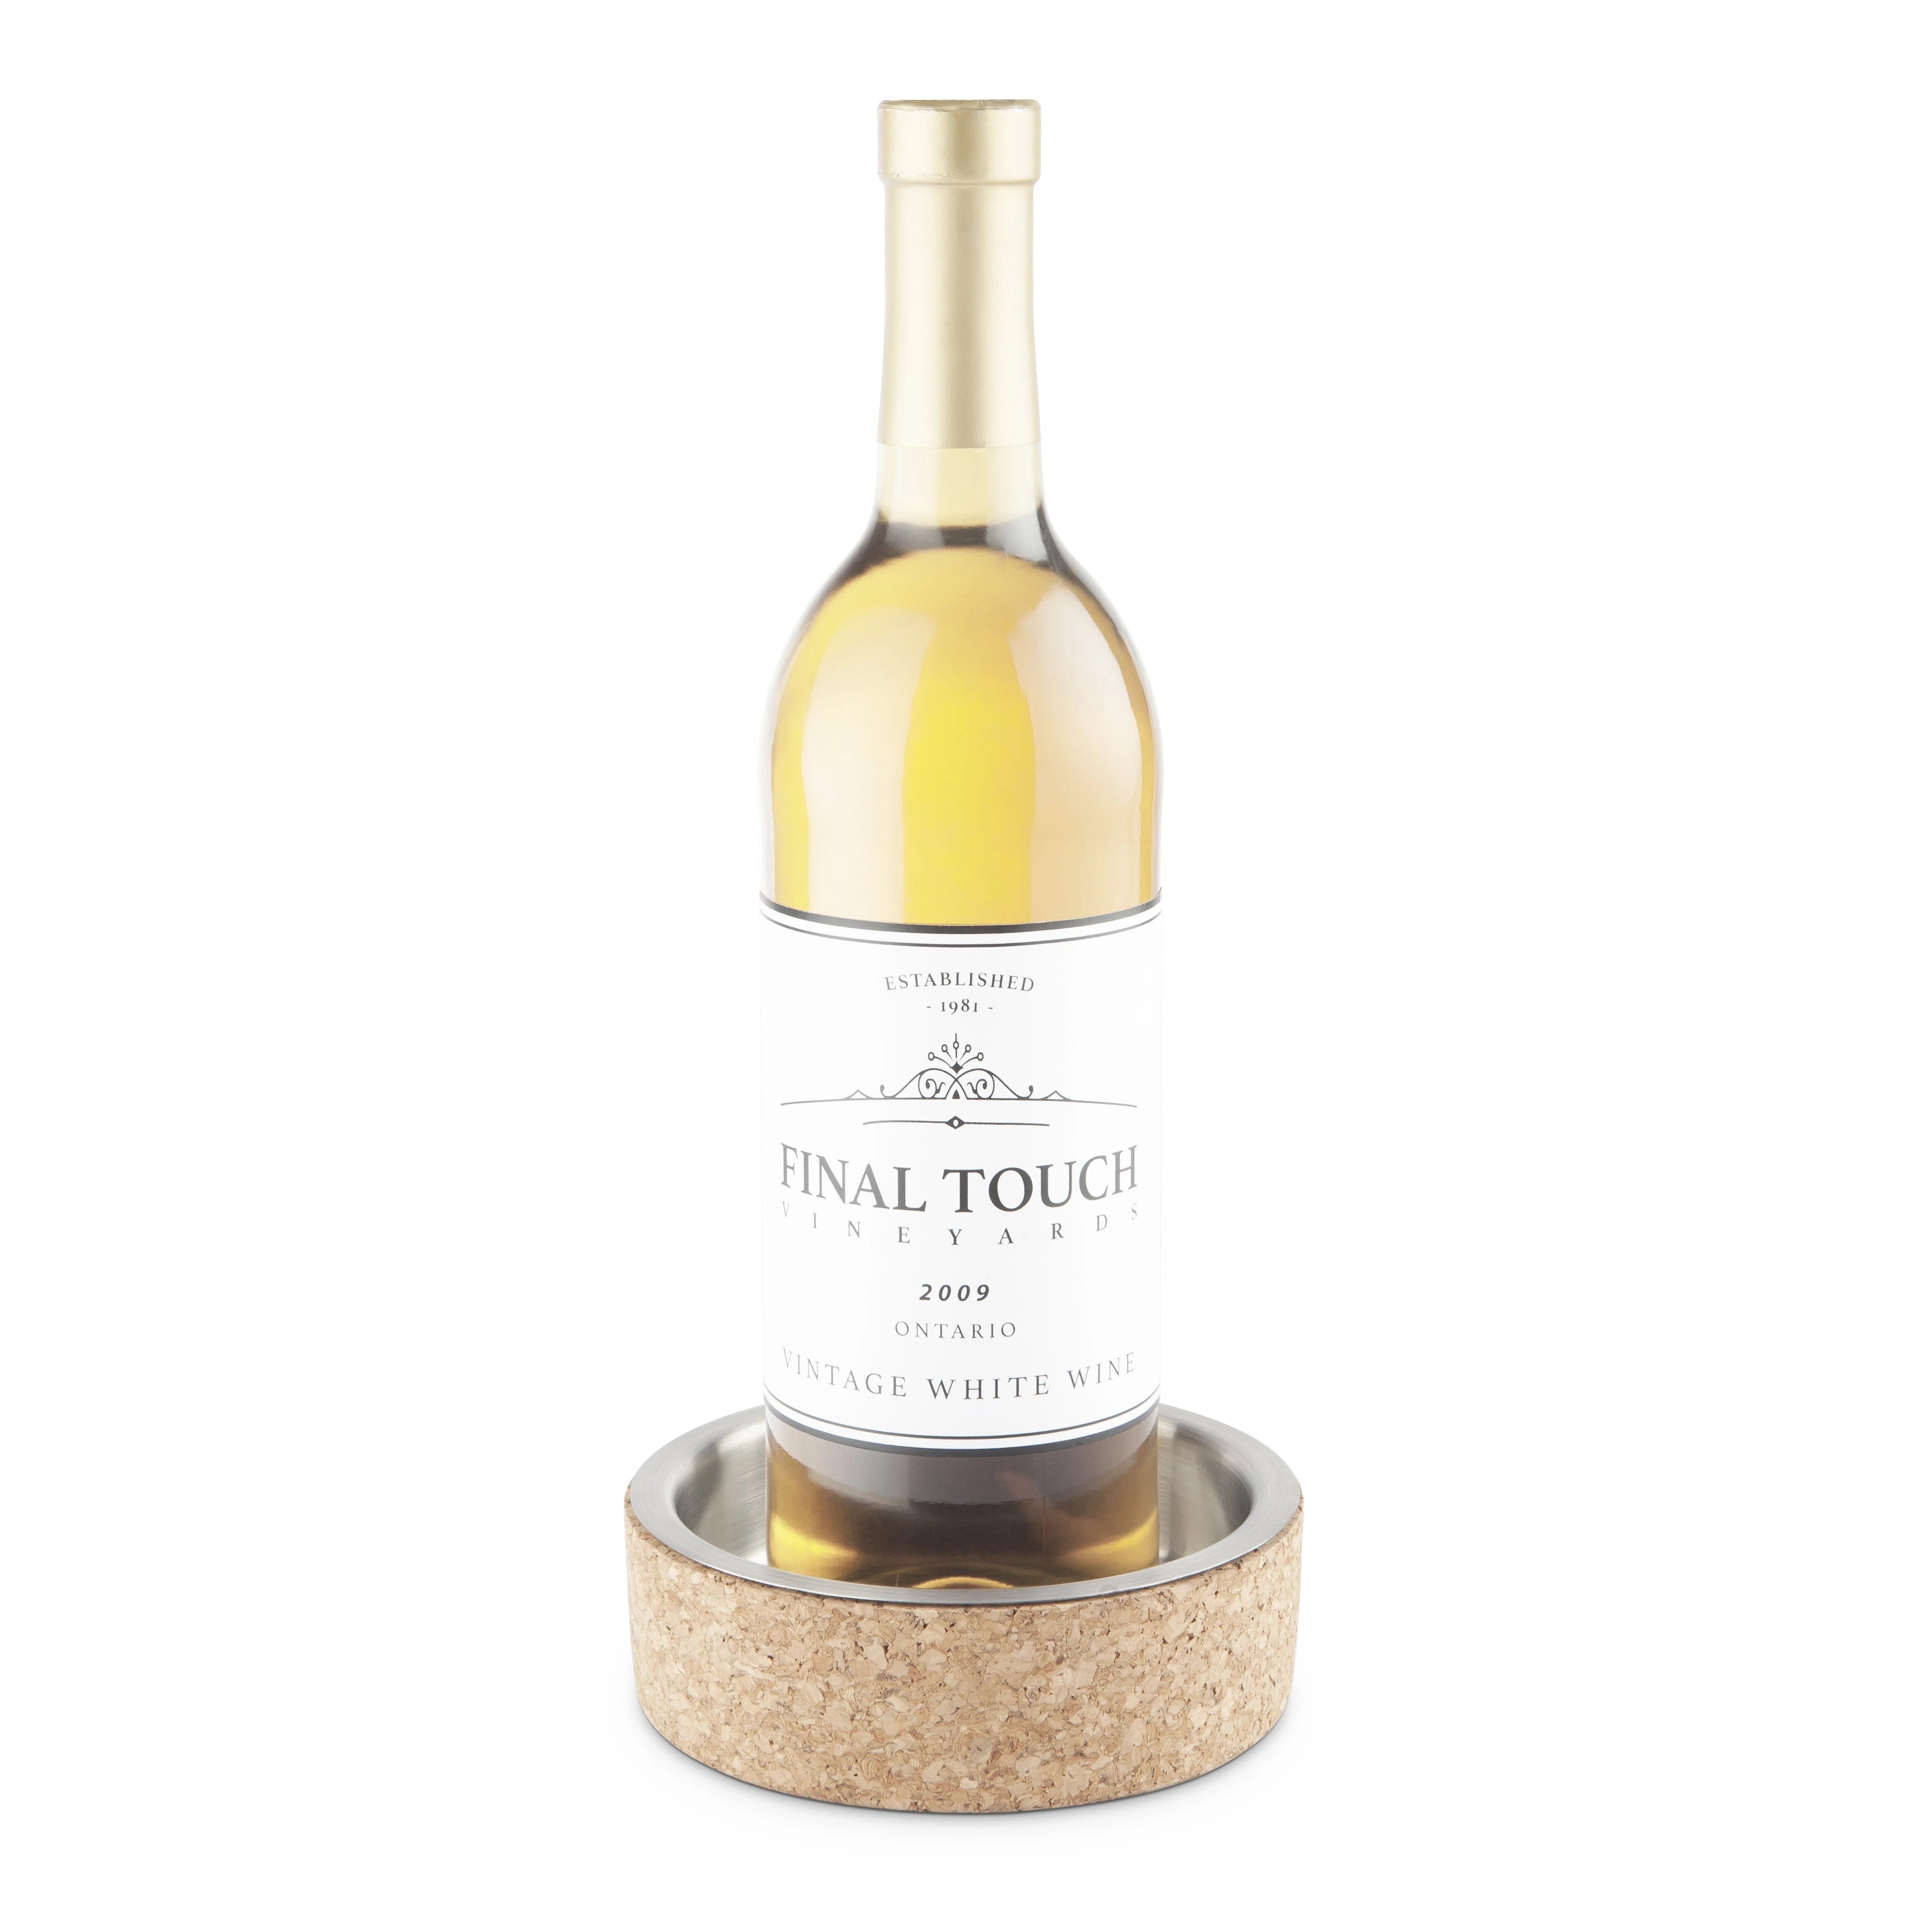 FINAL TOUCH HOLDER CORK & STAINLESS STEEL FTC60